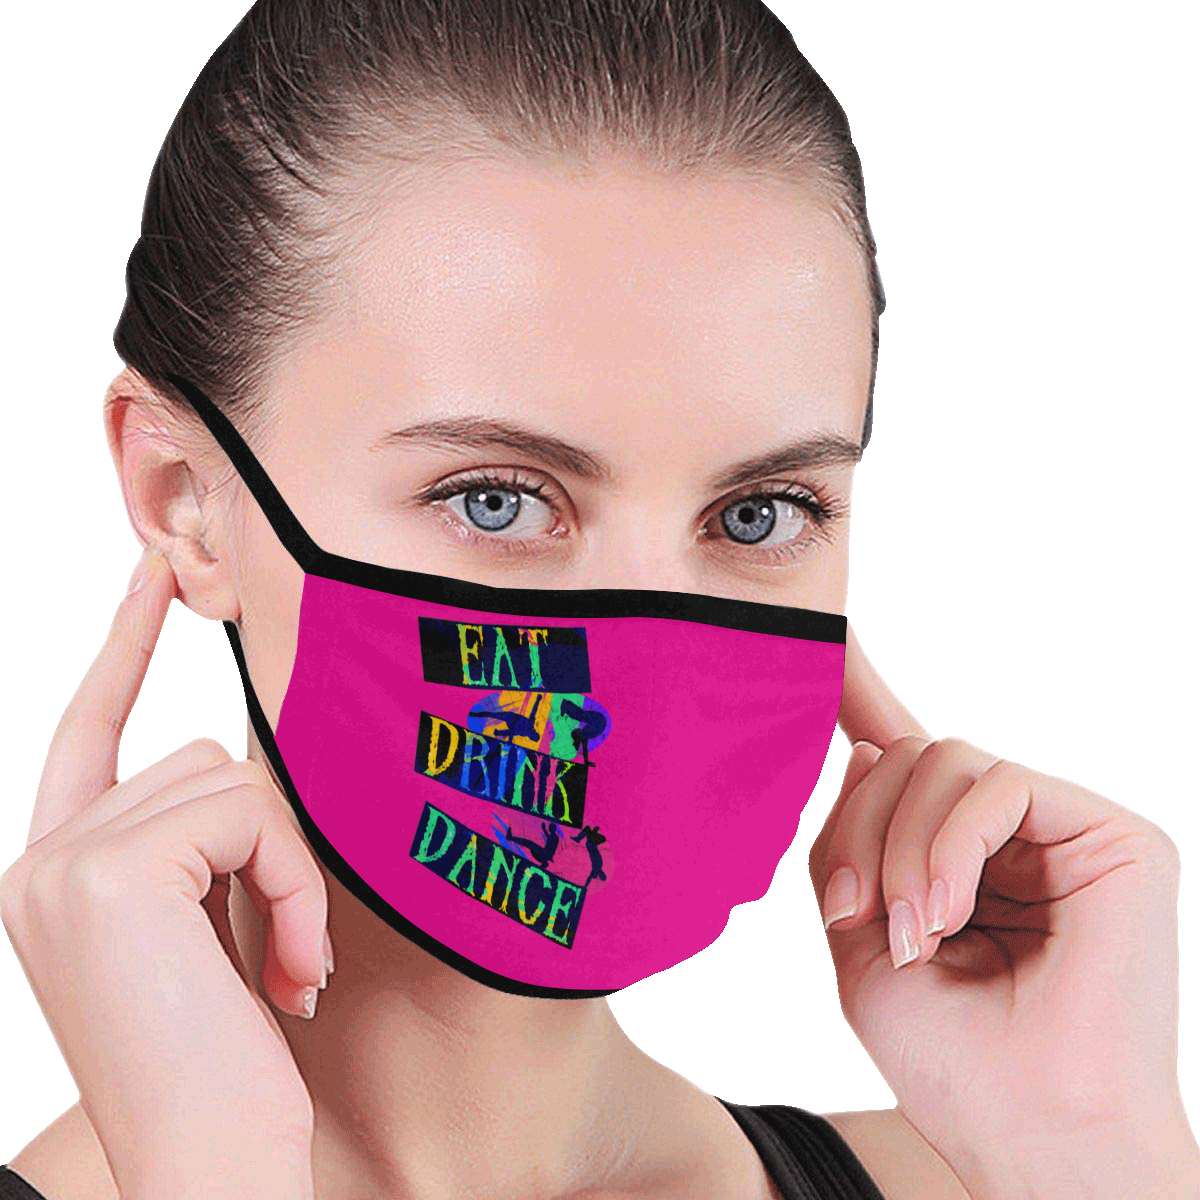 Break Dancing Colorful / Pink Mouth Mask